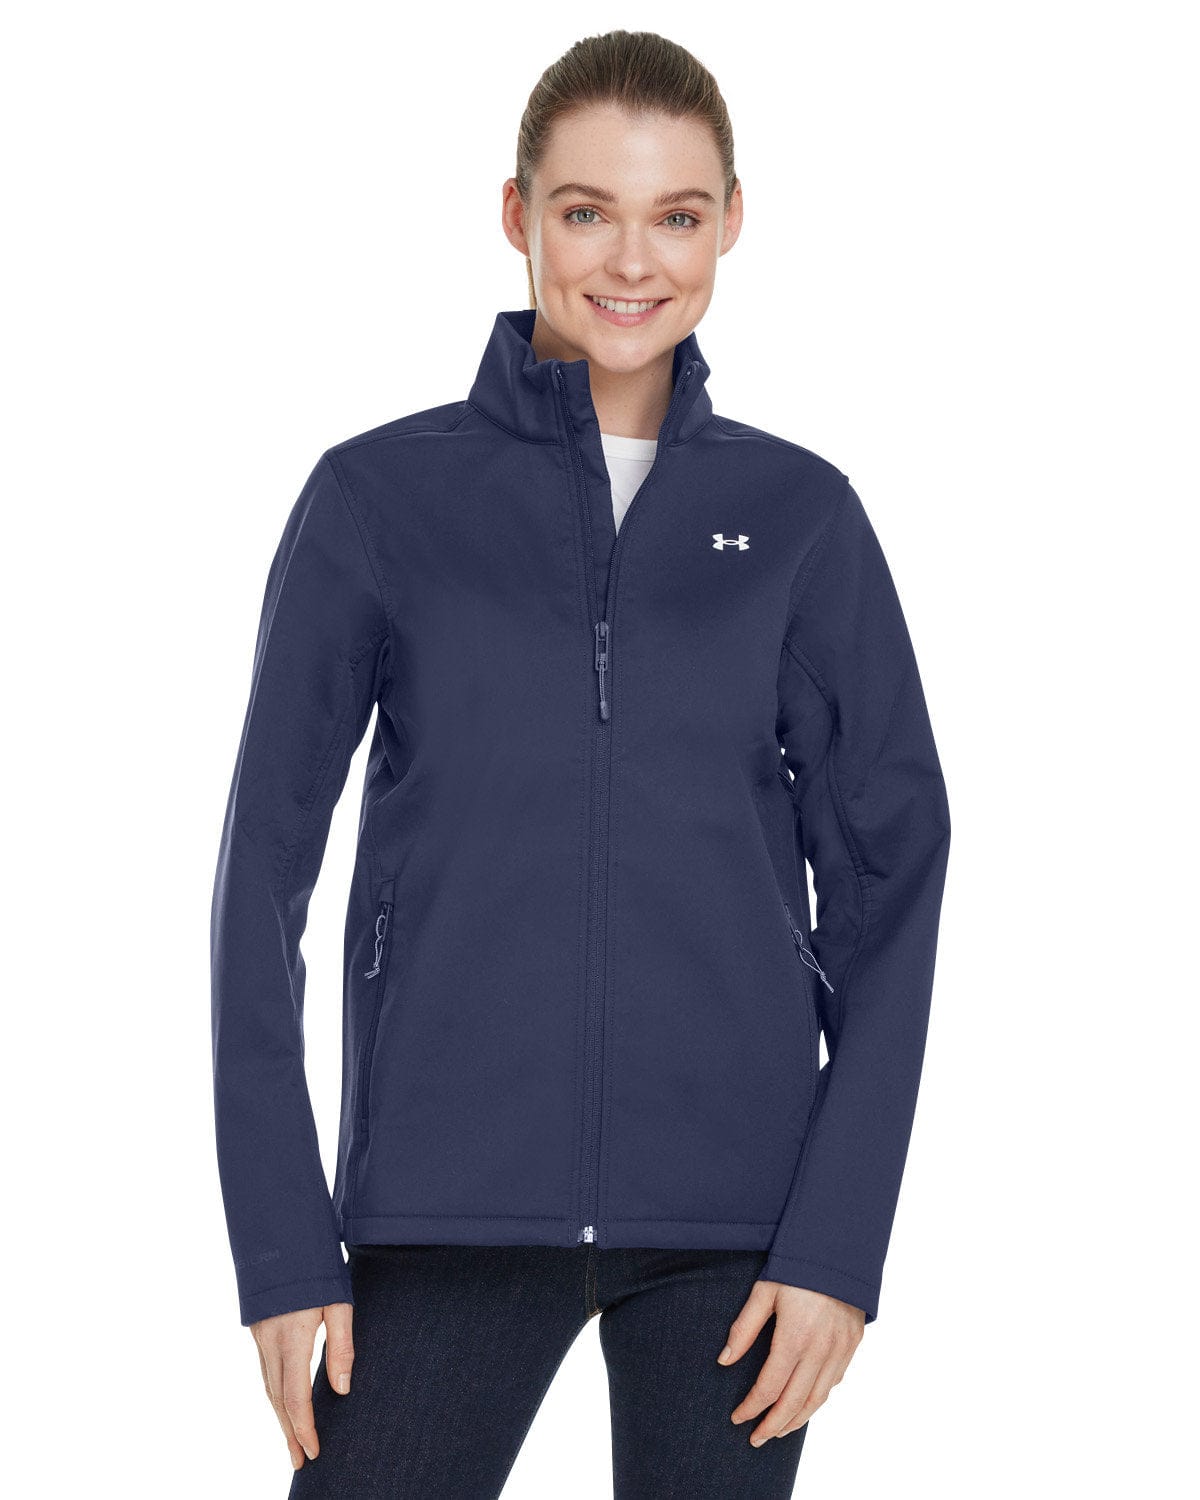 Under Armour UNDER ARMOUR Cold Gear Jacket Women Small/ Youth XL